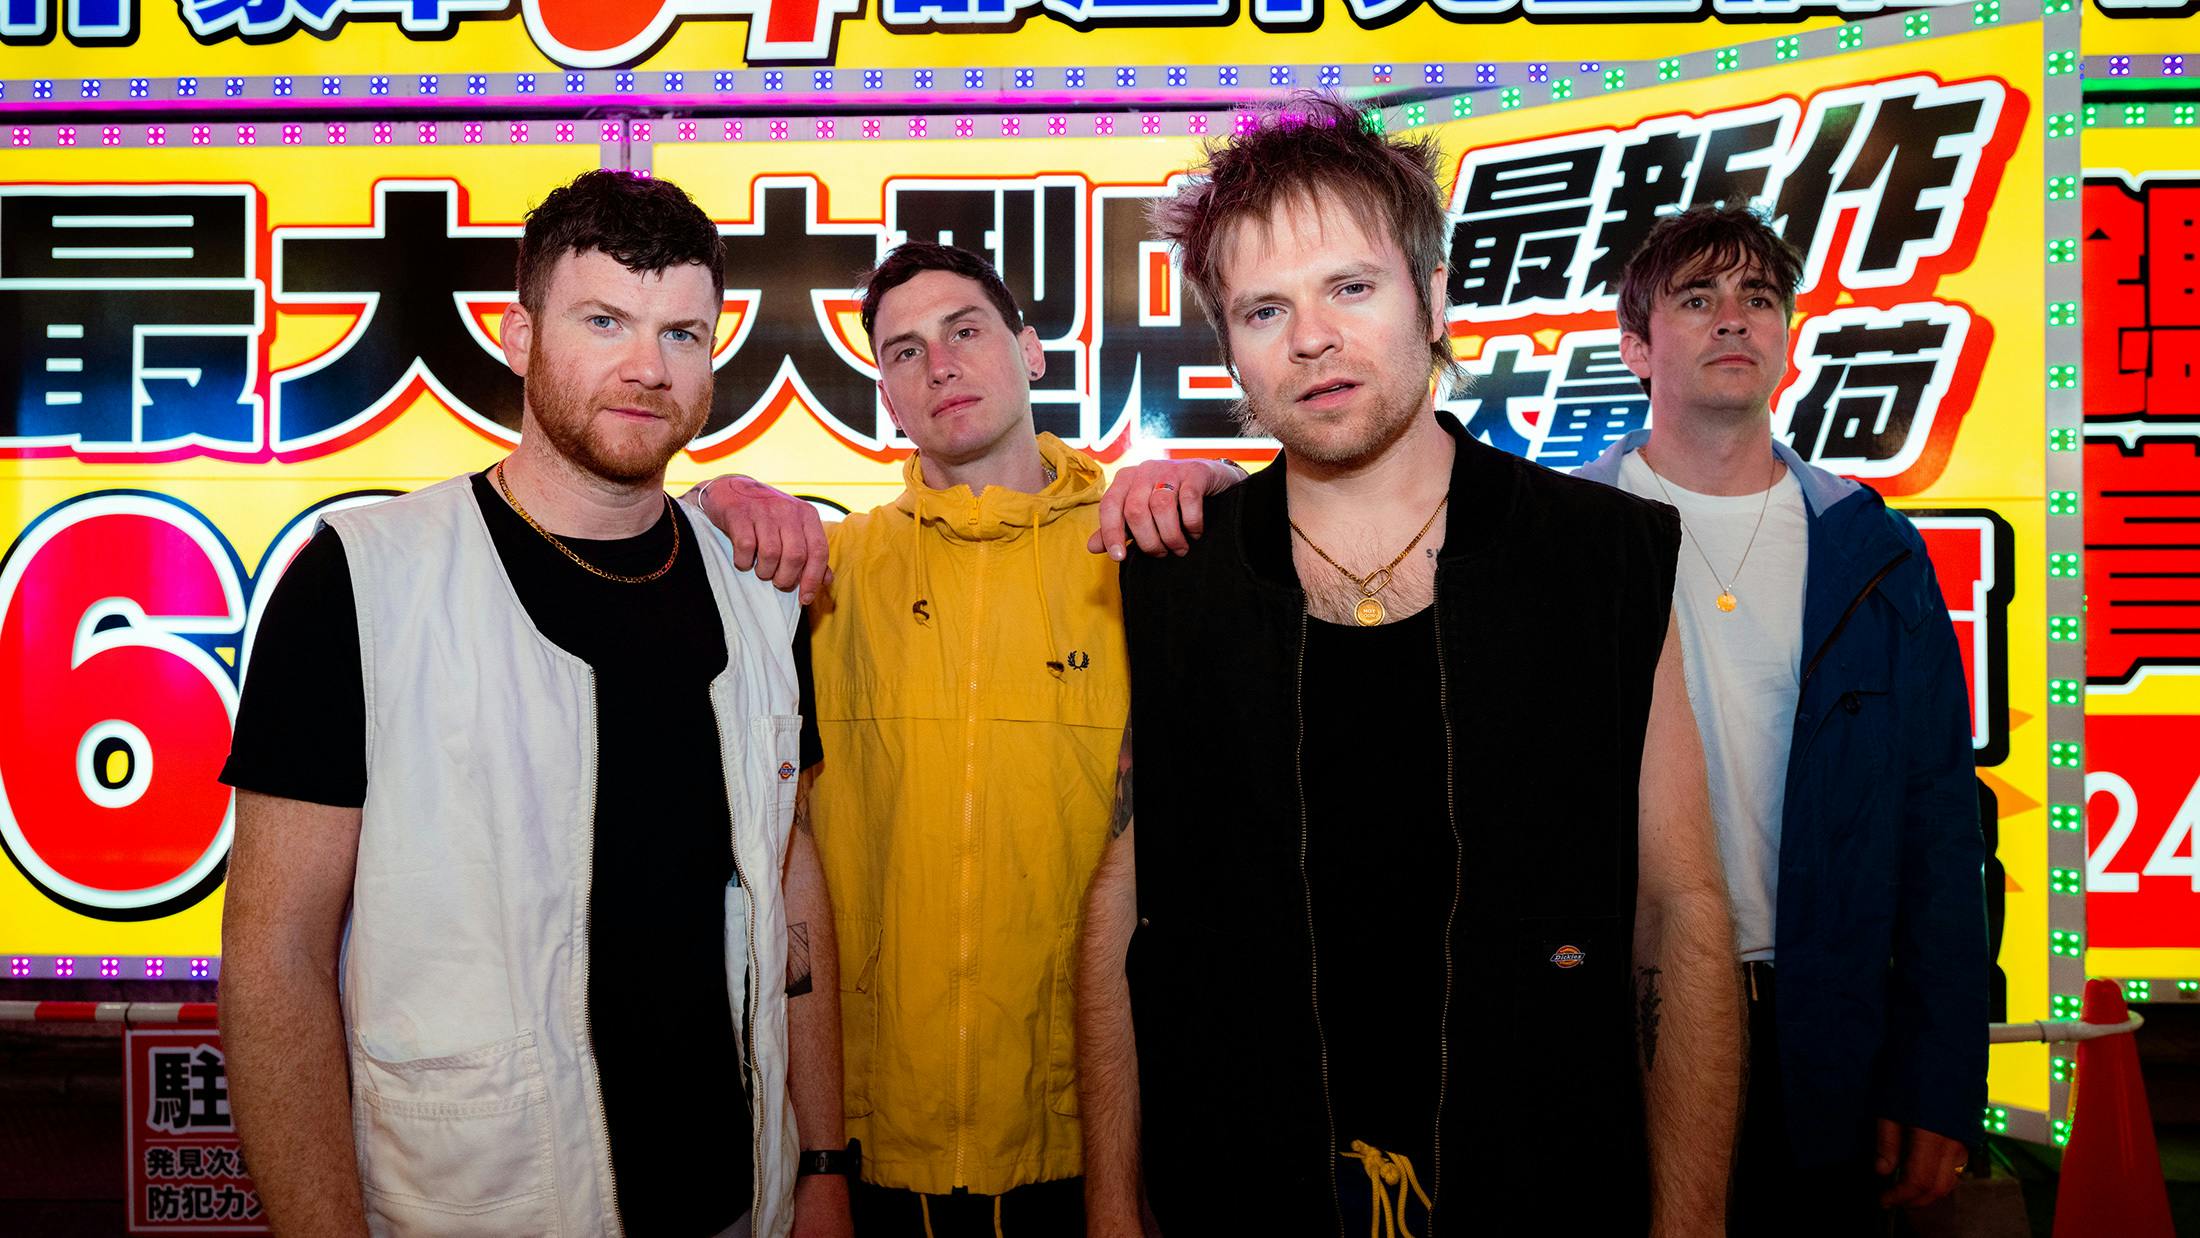 Here’s Enter Shikari’s setlist from the first night of their UK tour